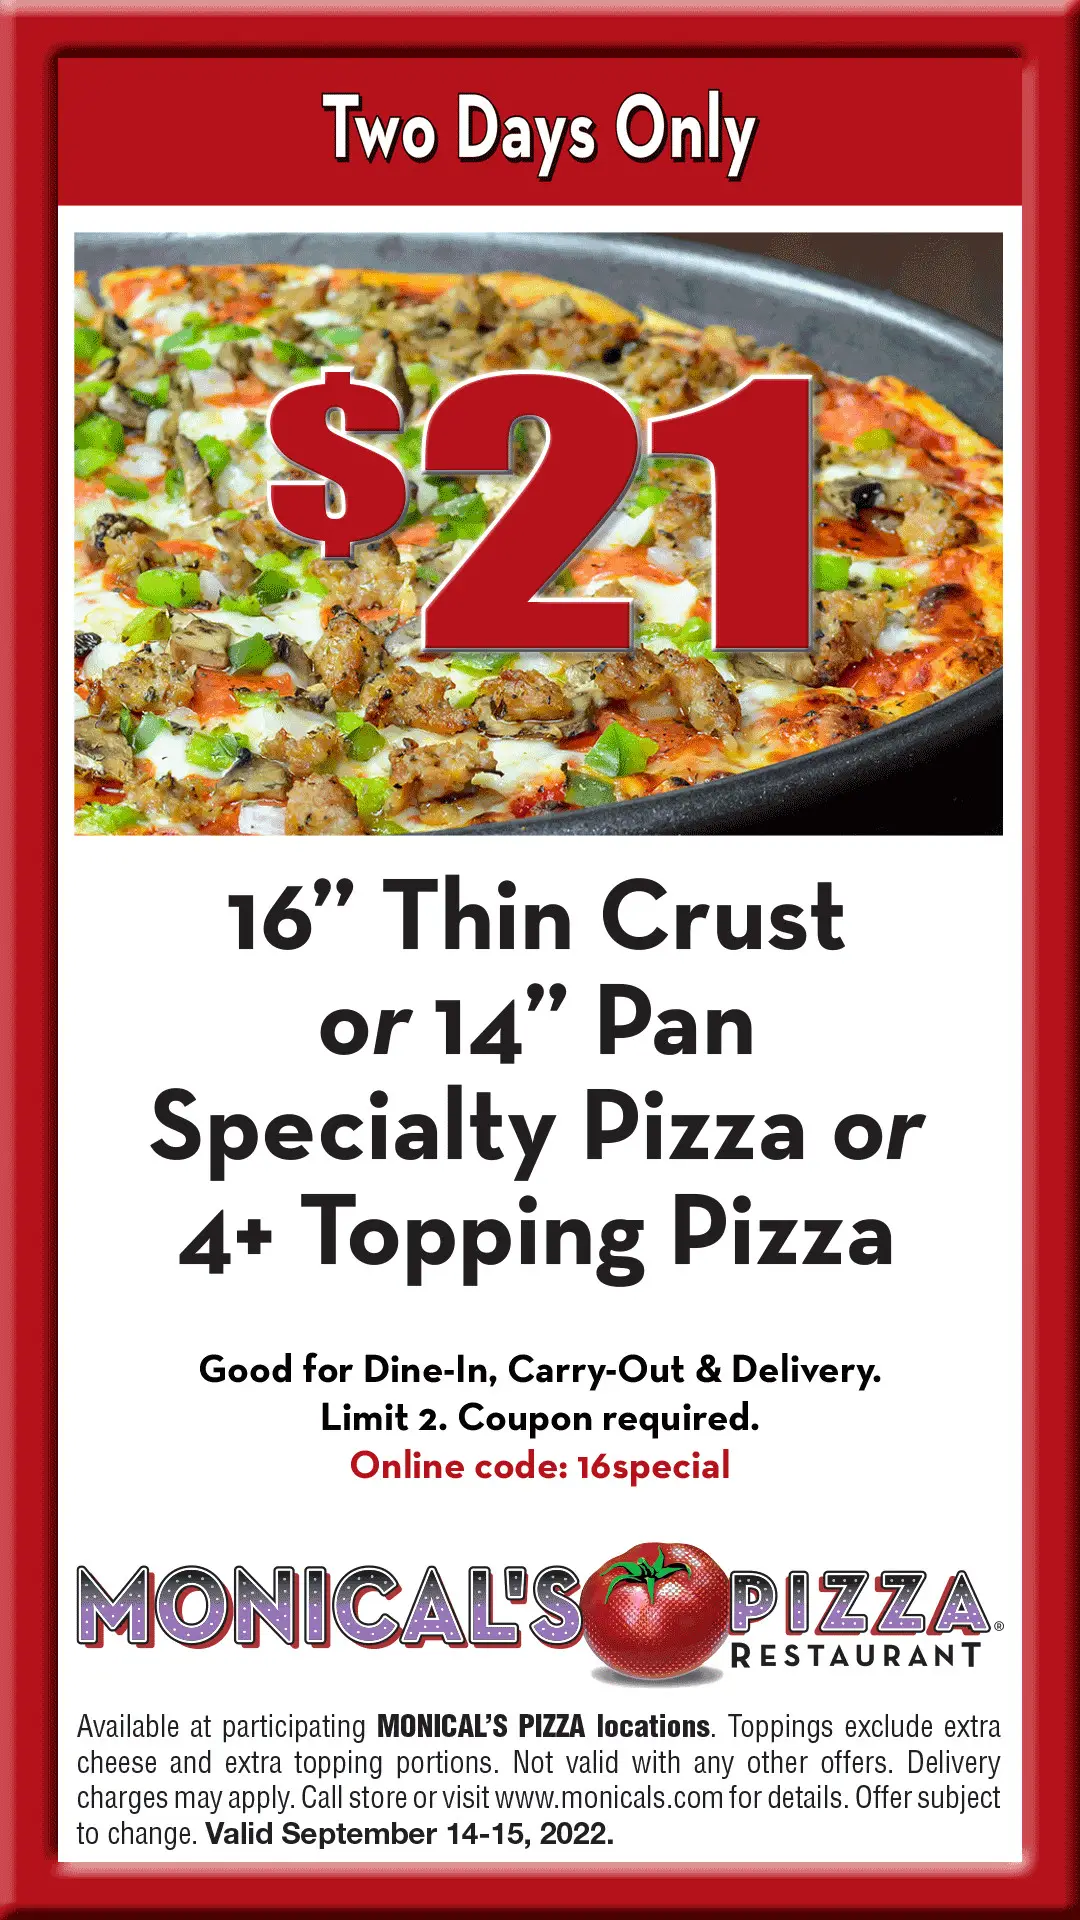 50 Off Monical's Pizza Coupons, Promo Codes & Deals (Nov 2022)